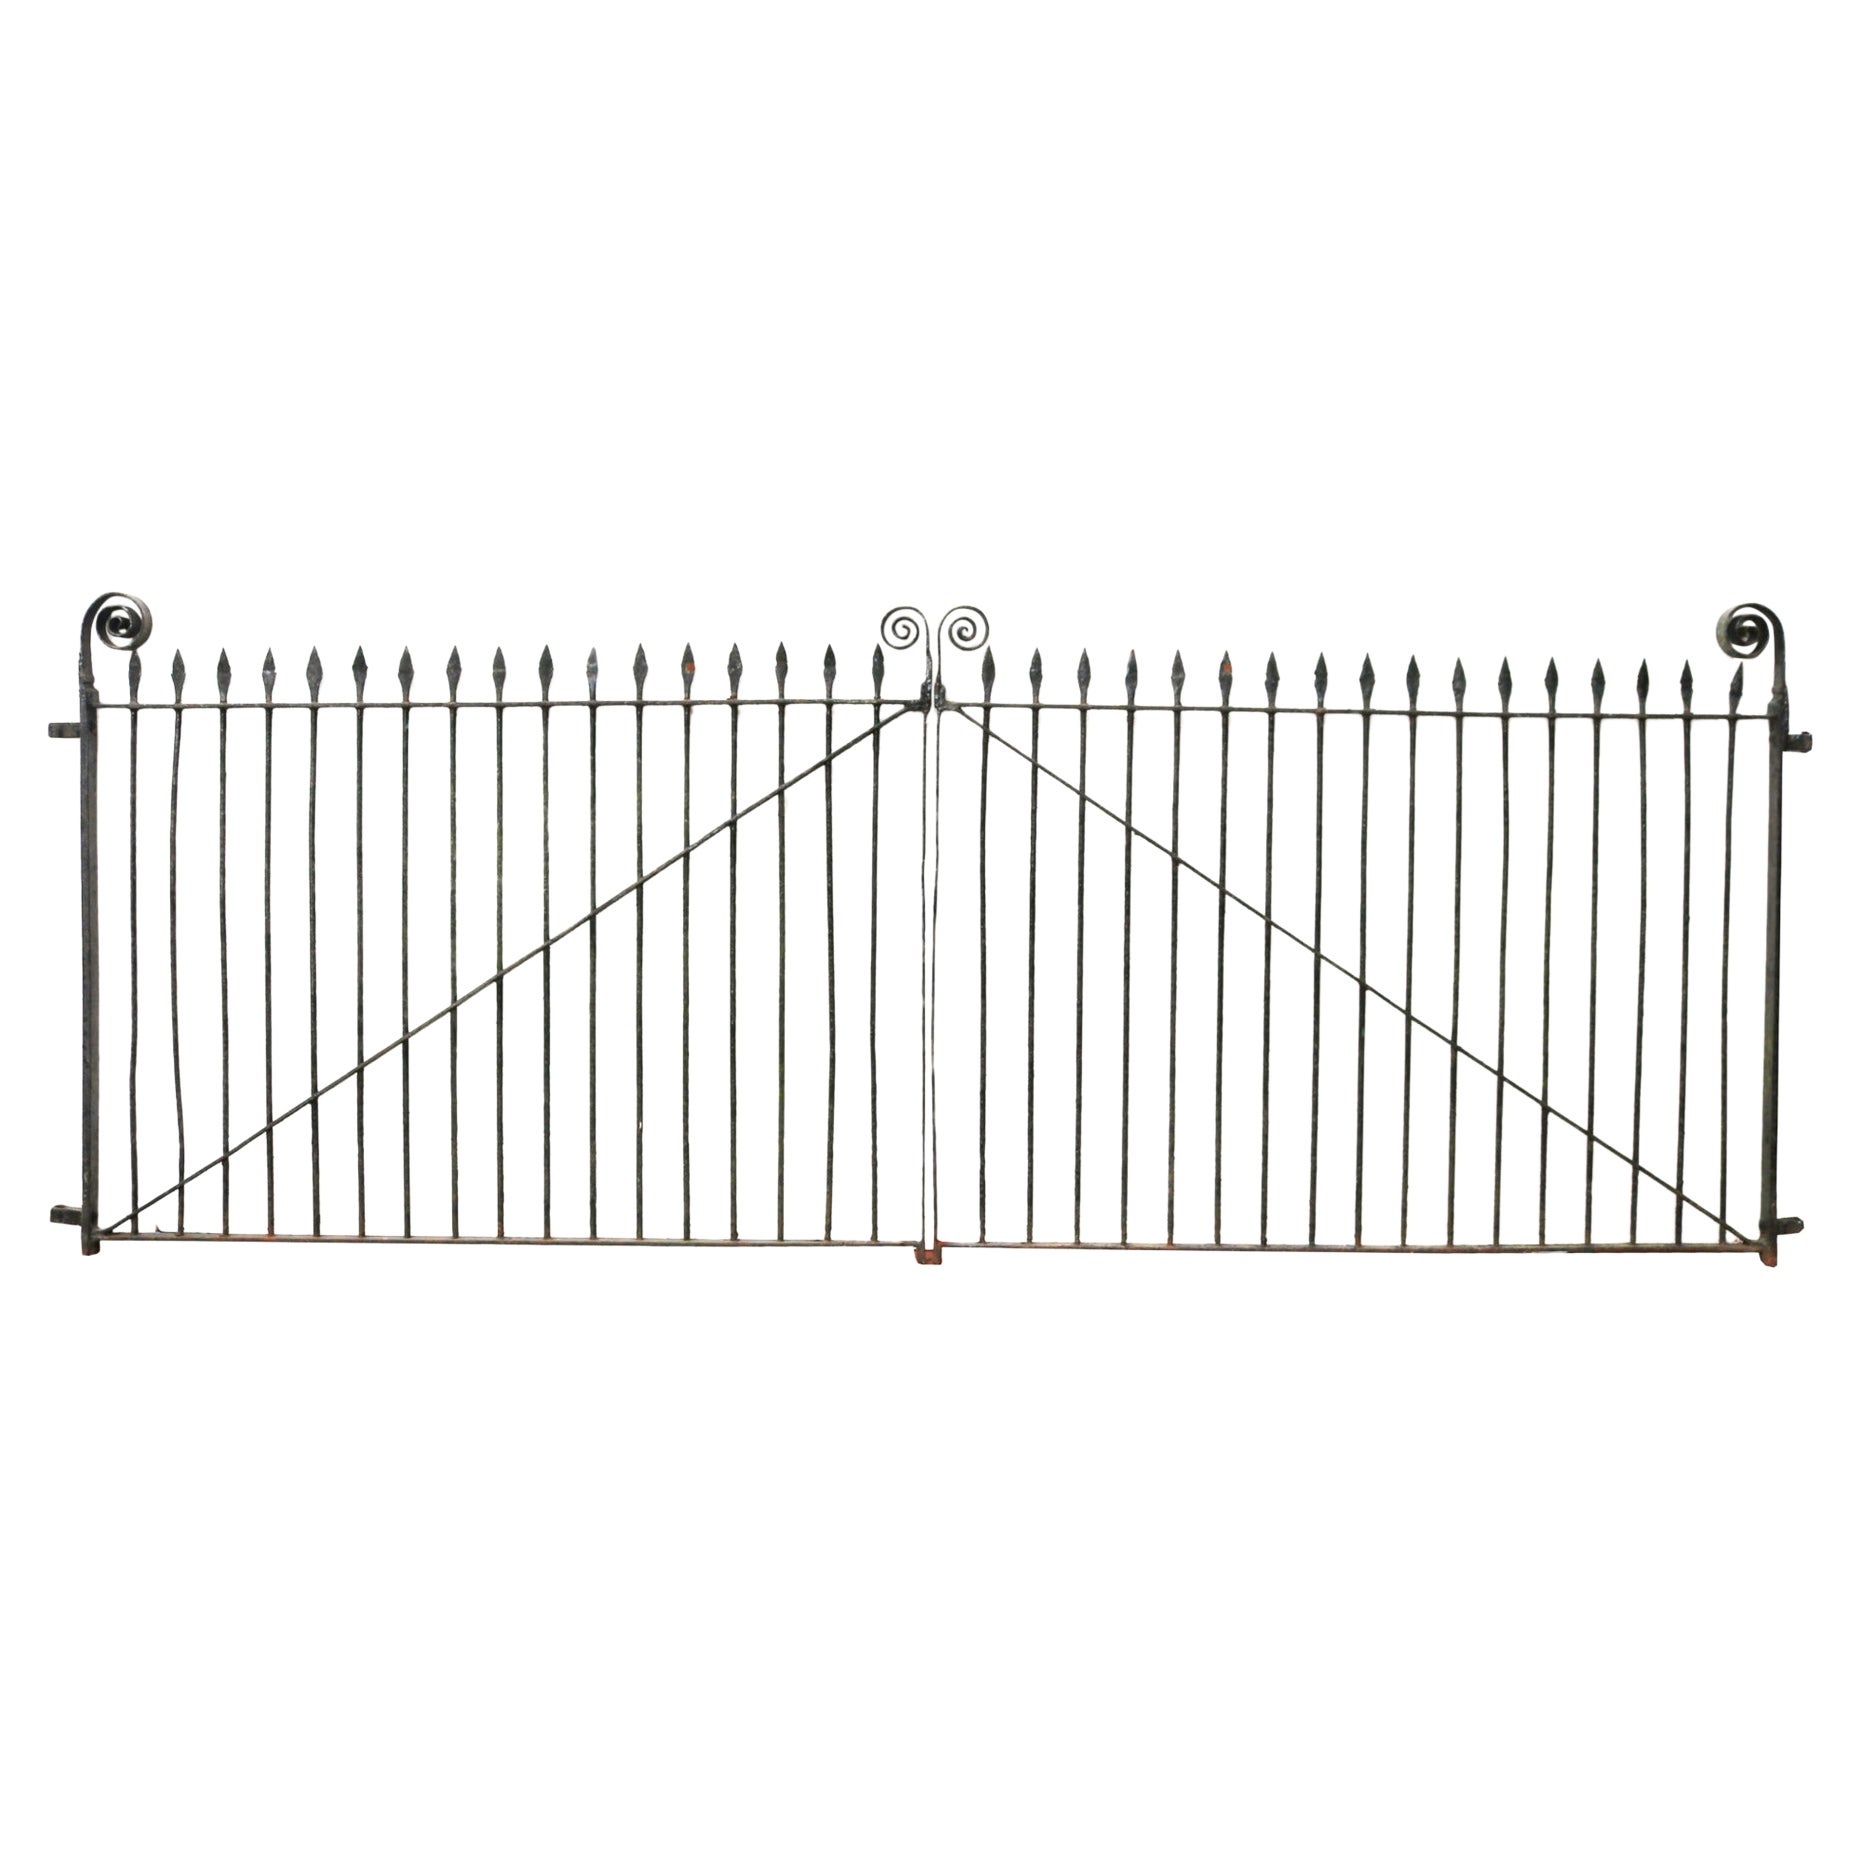 Reclaimed Wrought Iron Driveway Gates 374 cm (12ft)